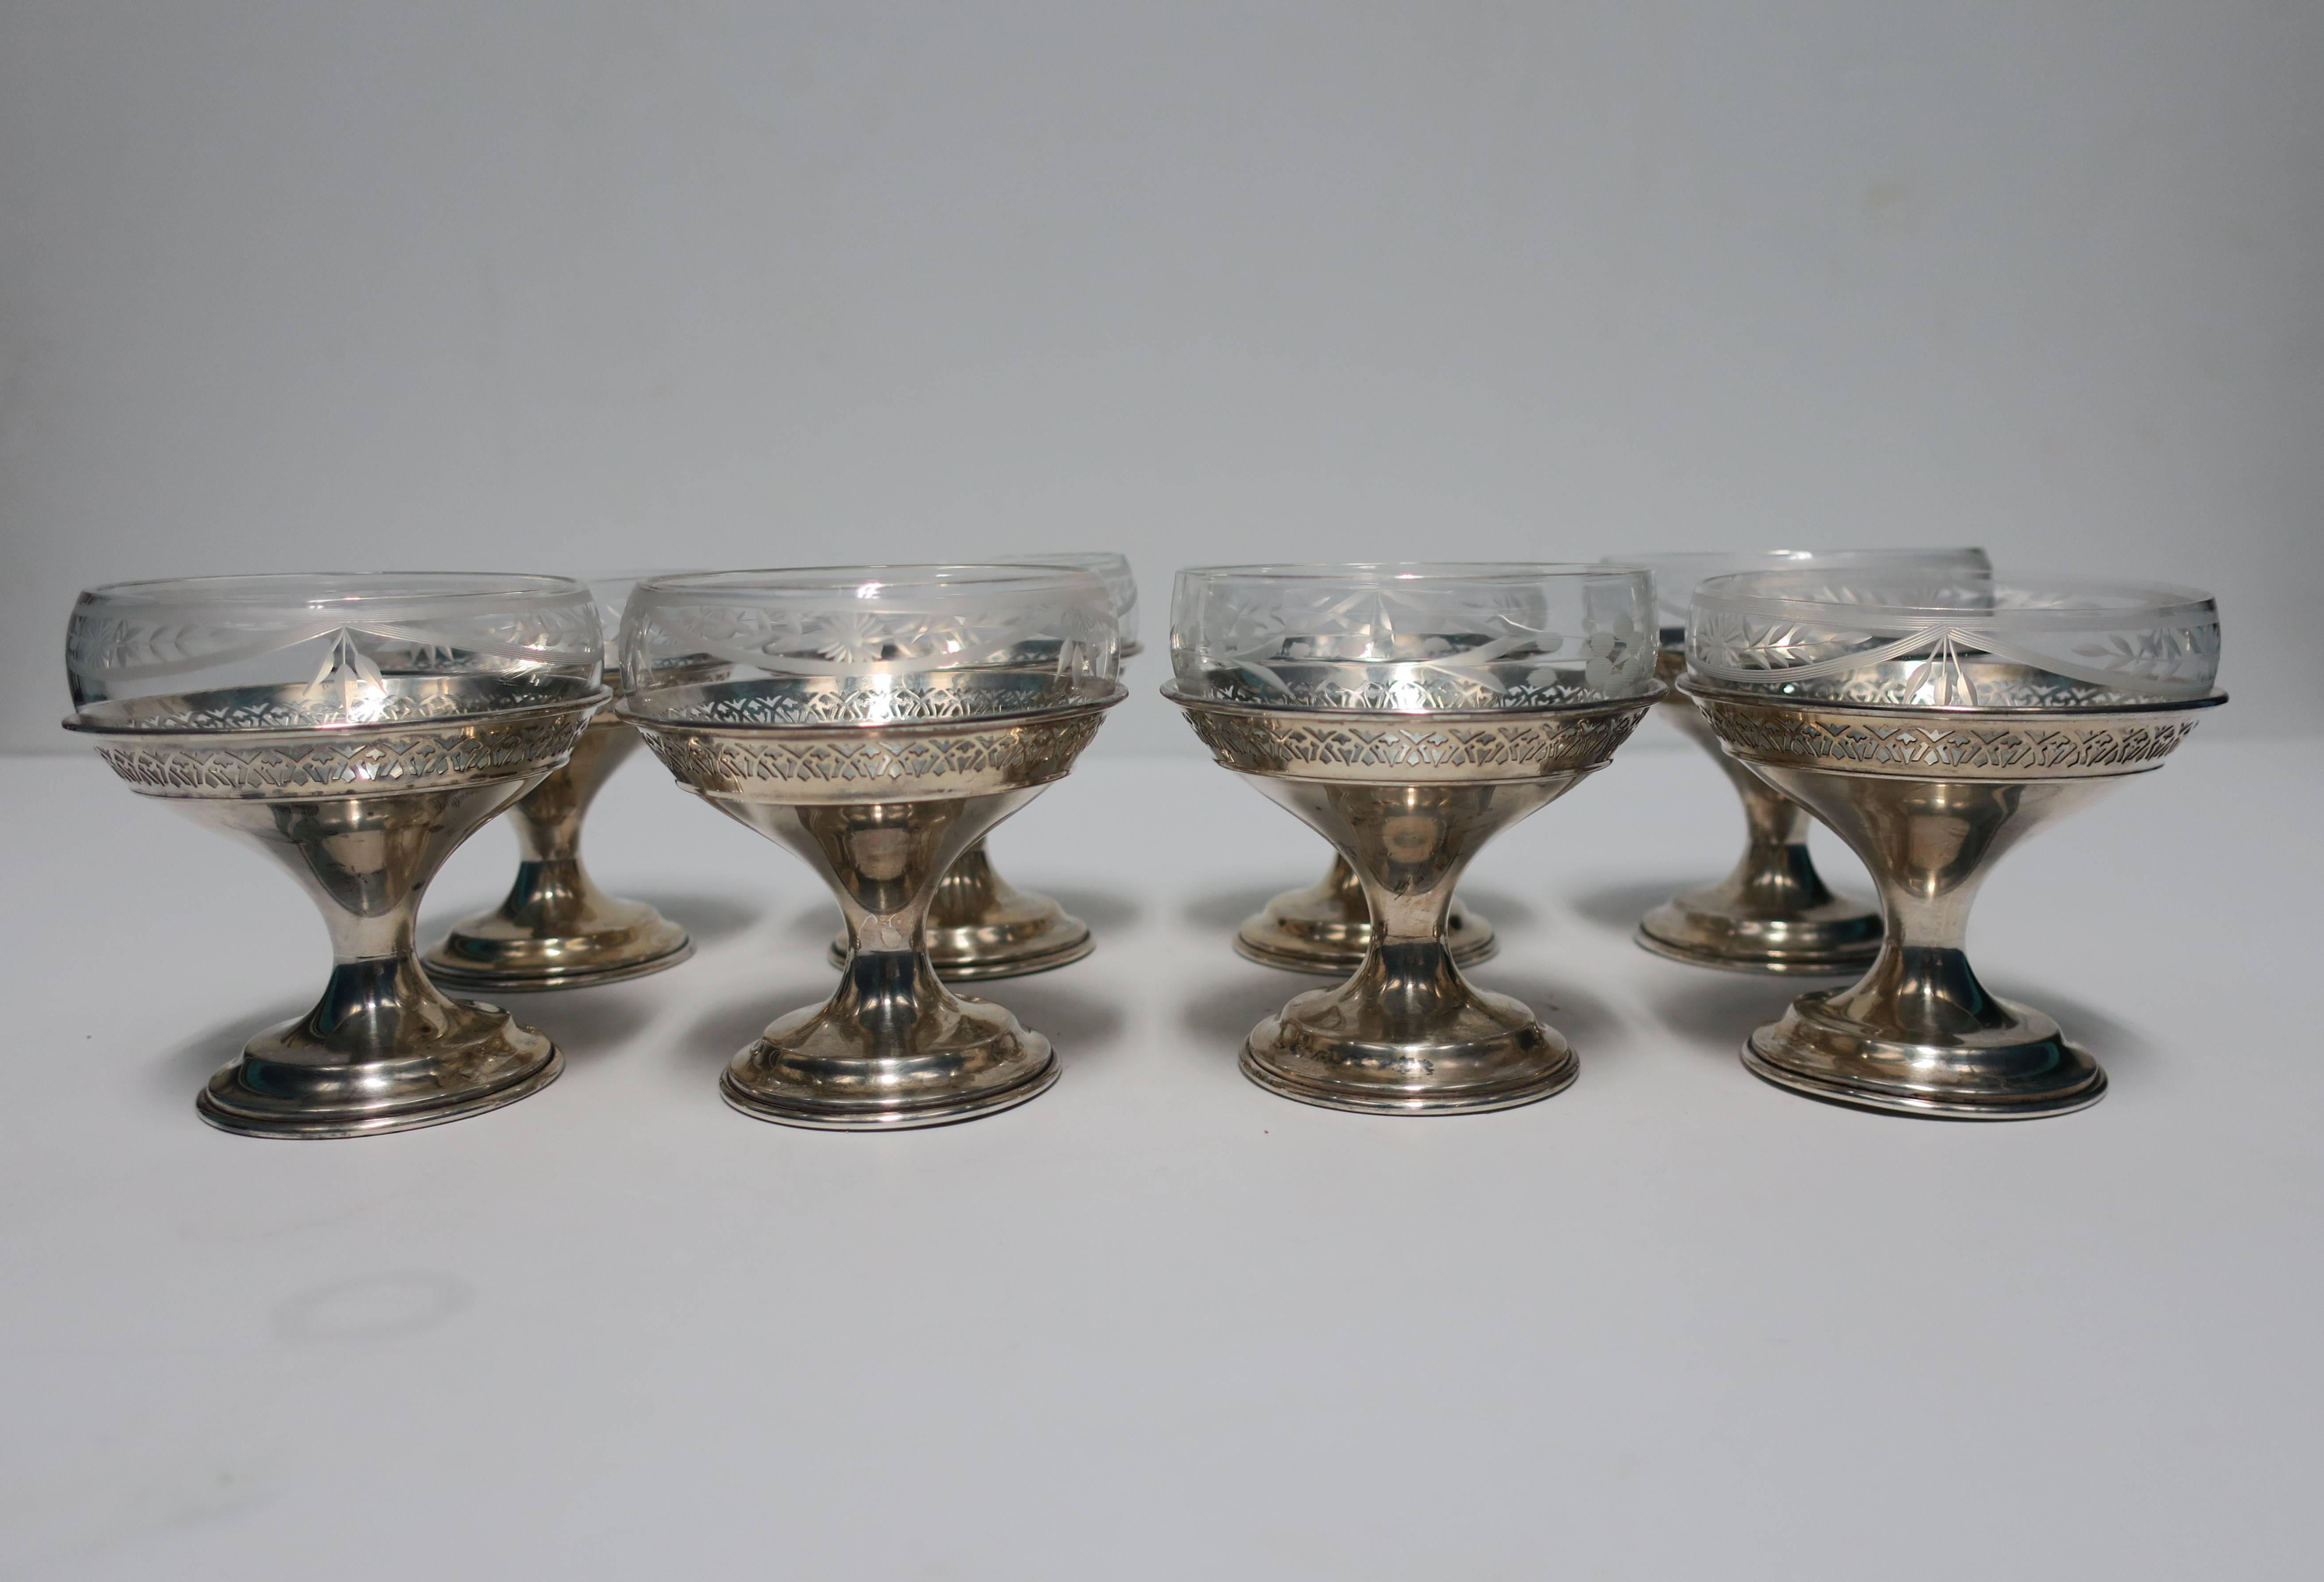 Set of 8 Available Here for $950

A beautiful vintage set of eight (8) sterling silver and cut crystal Champagne coup glasses or dessert vessels by Wallace. With maker's mark (WALLACE) on bottom and marked STERLING. Beautiful perforated details